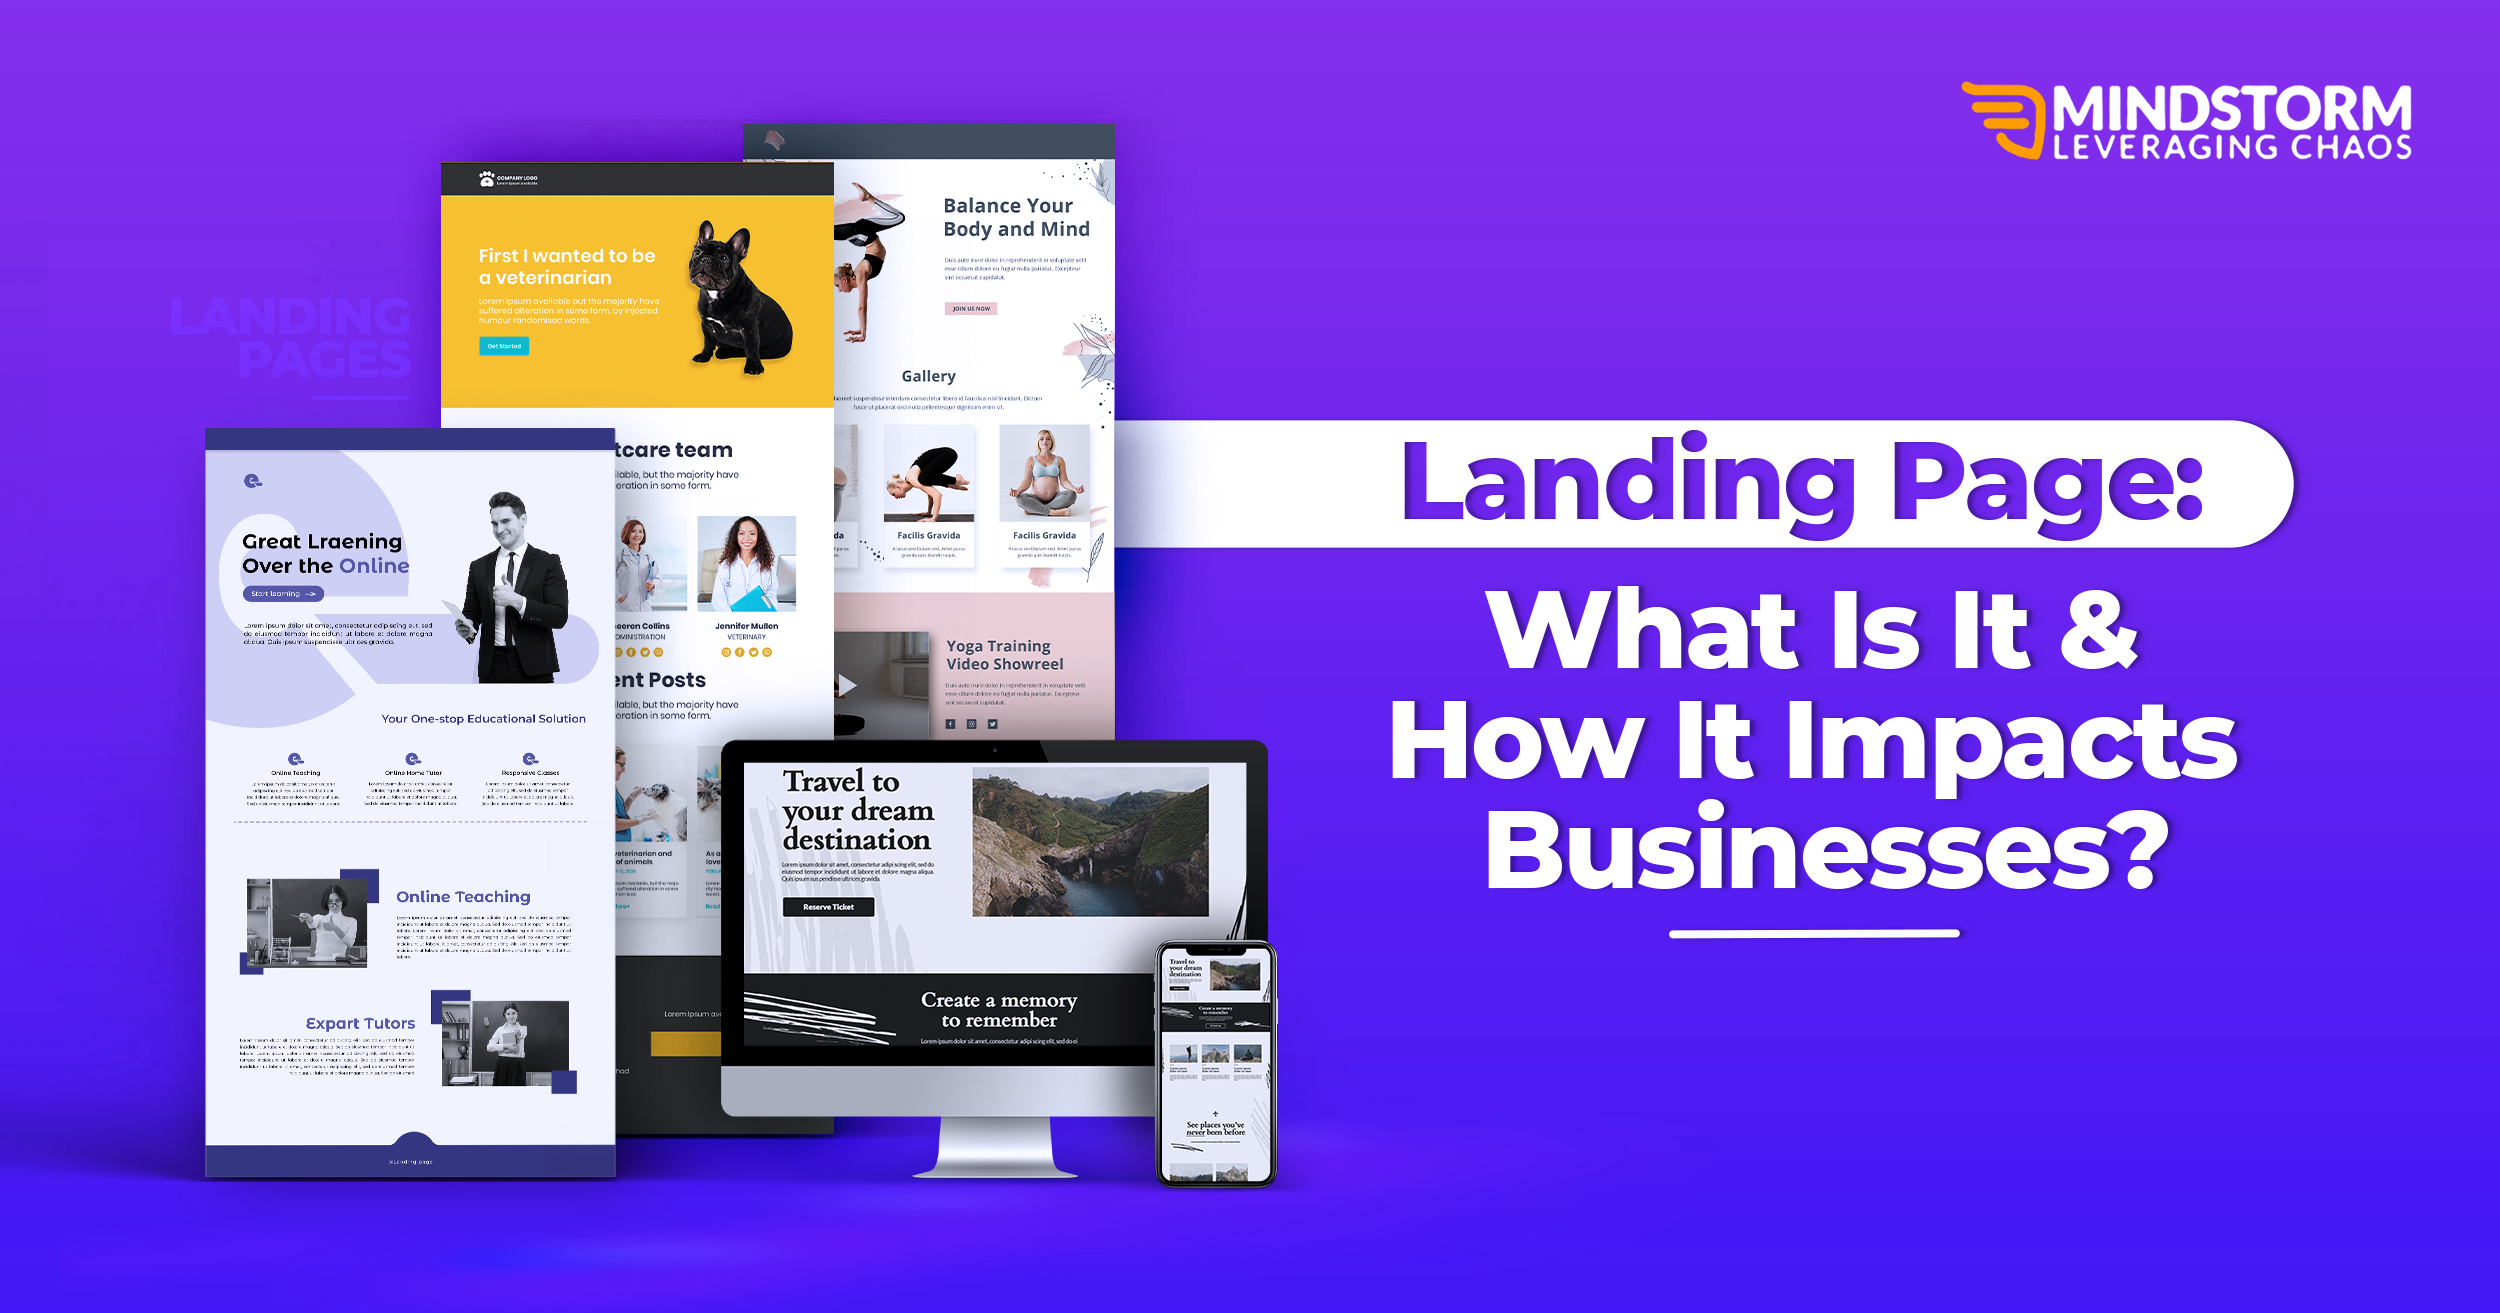 Landing Page: What Is It & How It Impacts Businesses?